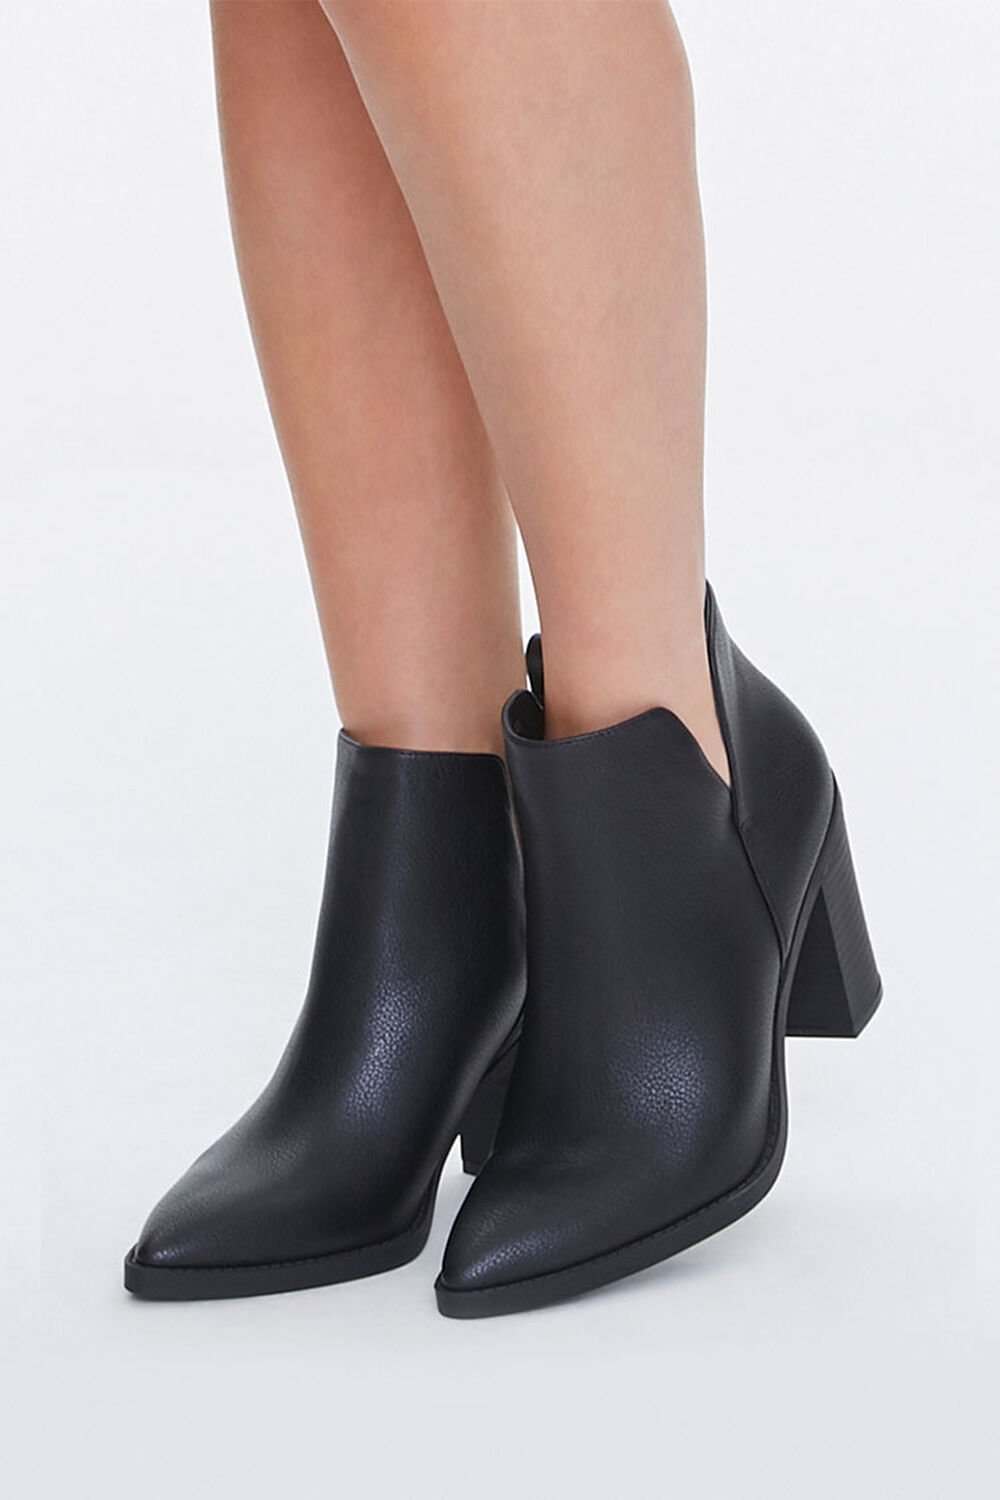 BLACK Faux Leather Pointed Booties, image 1